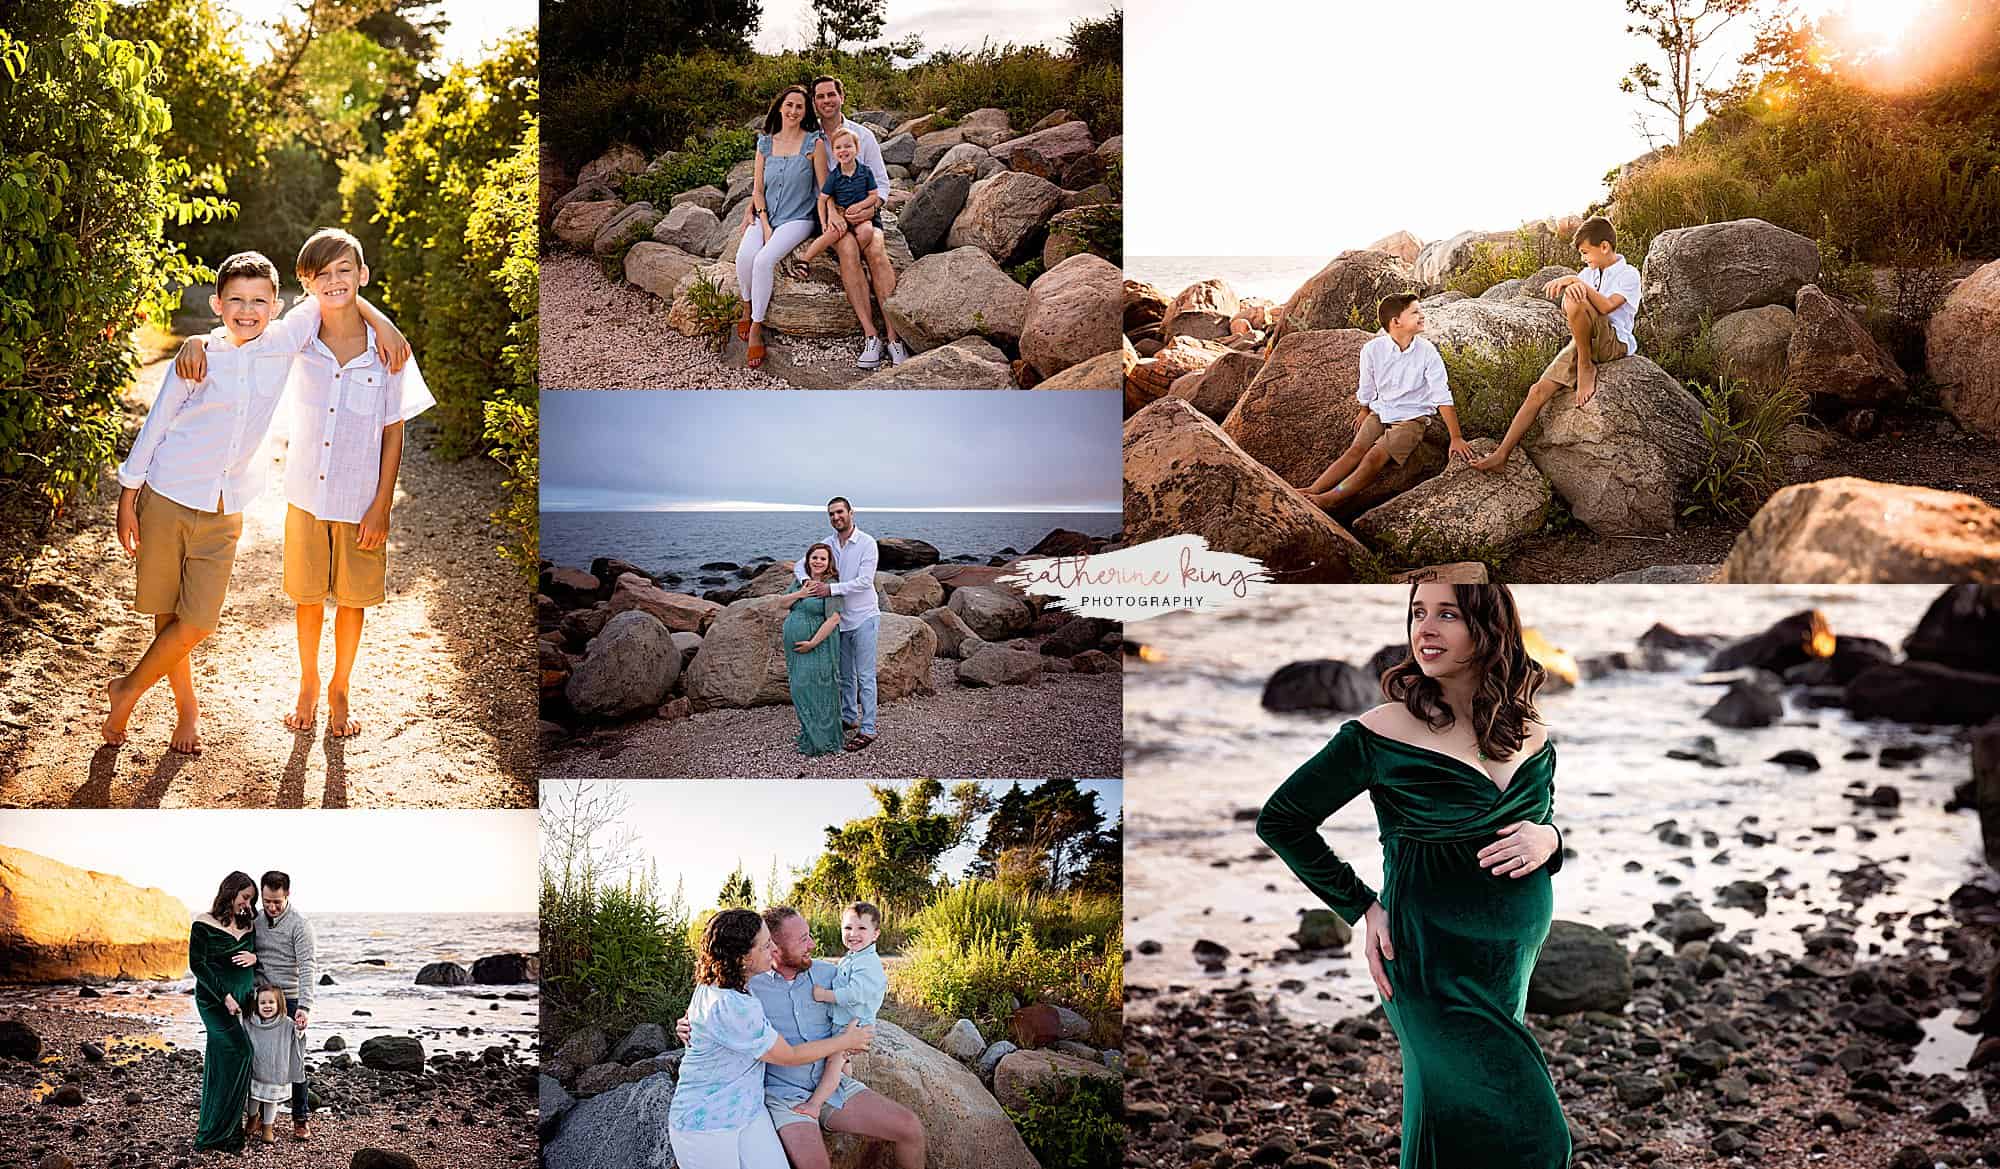 unique rocky beach location for your family photos in ct